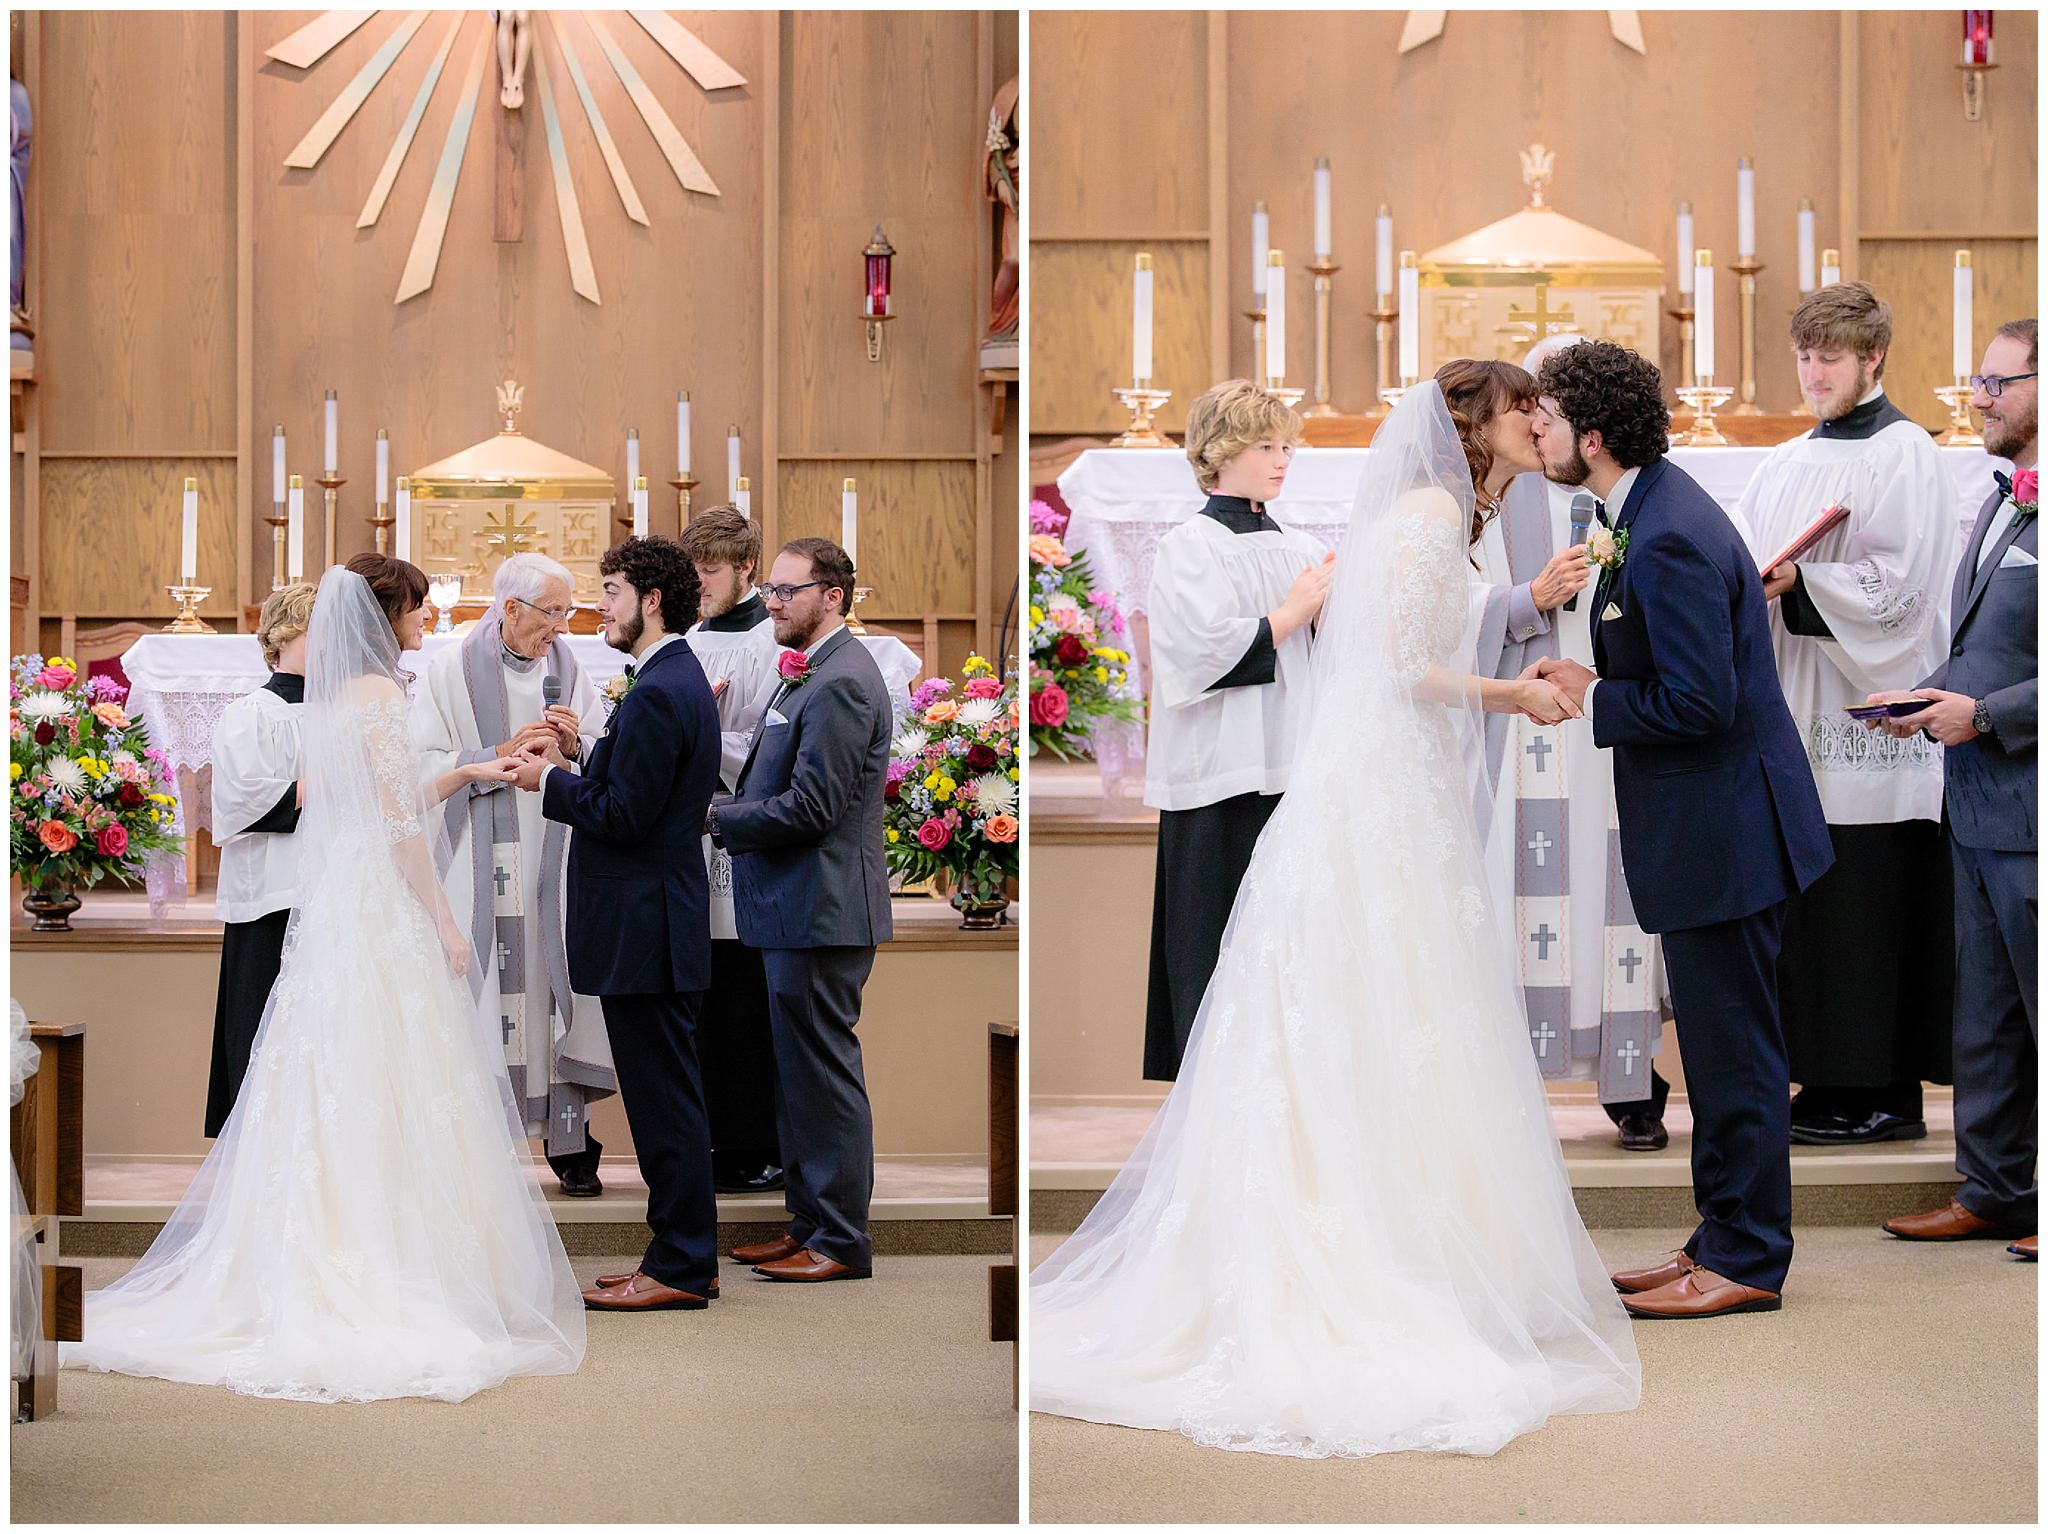 Newlyweds share a first kiss during a wedding ceremony at Saint Monica Parish